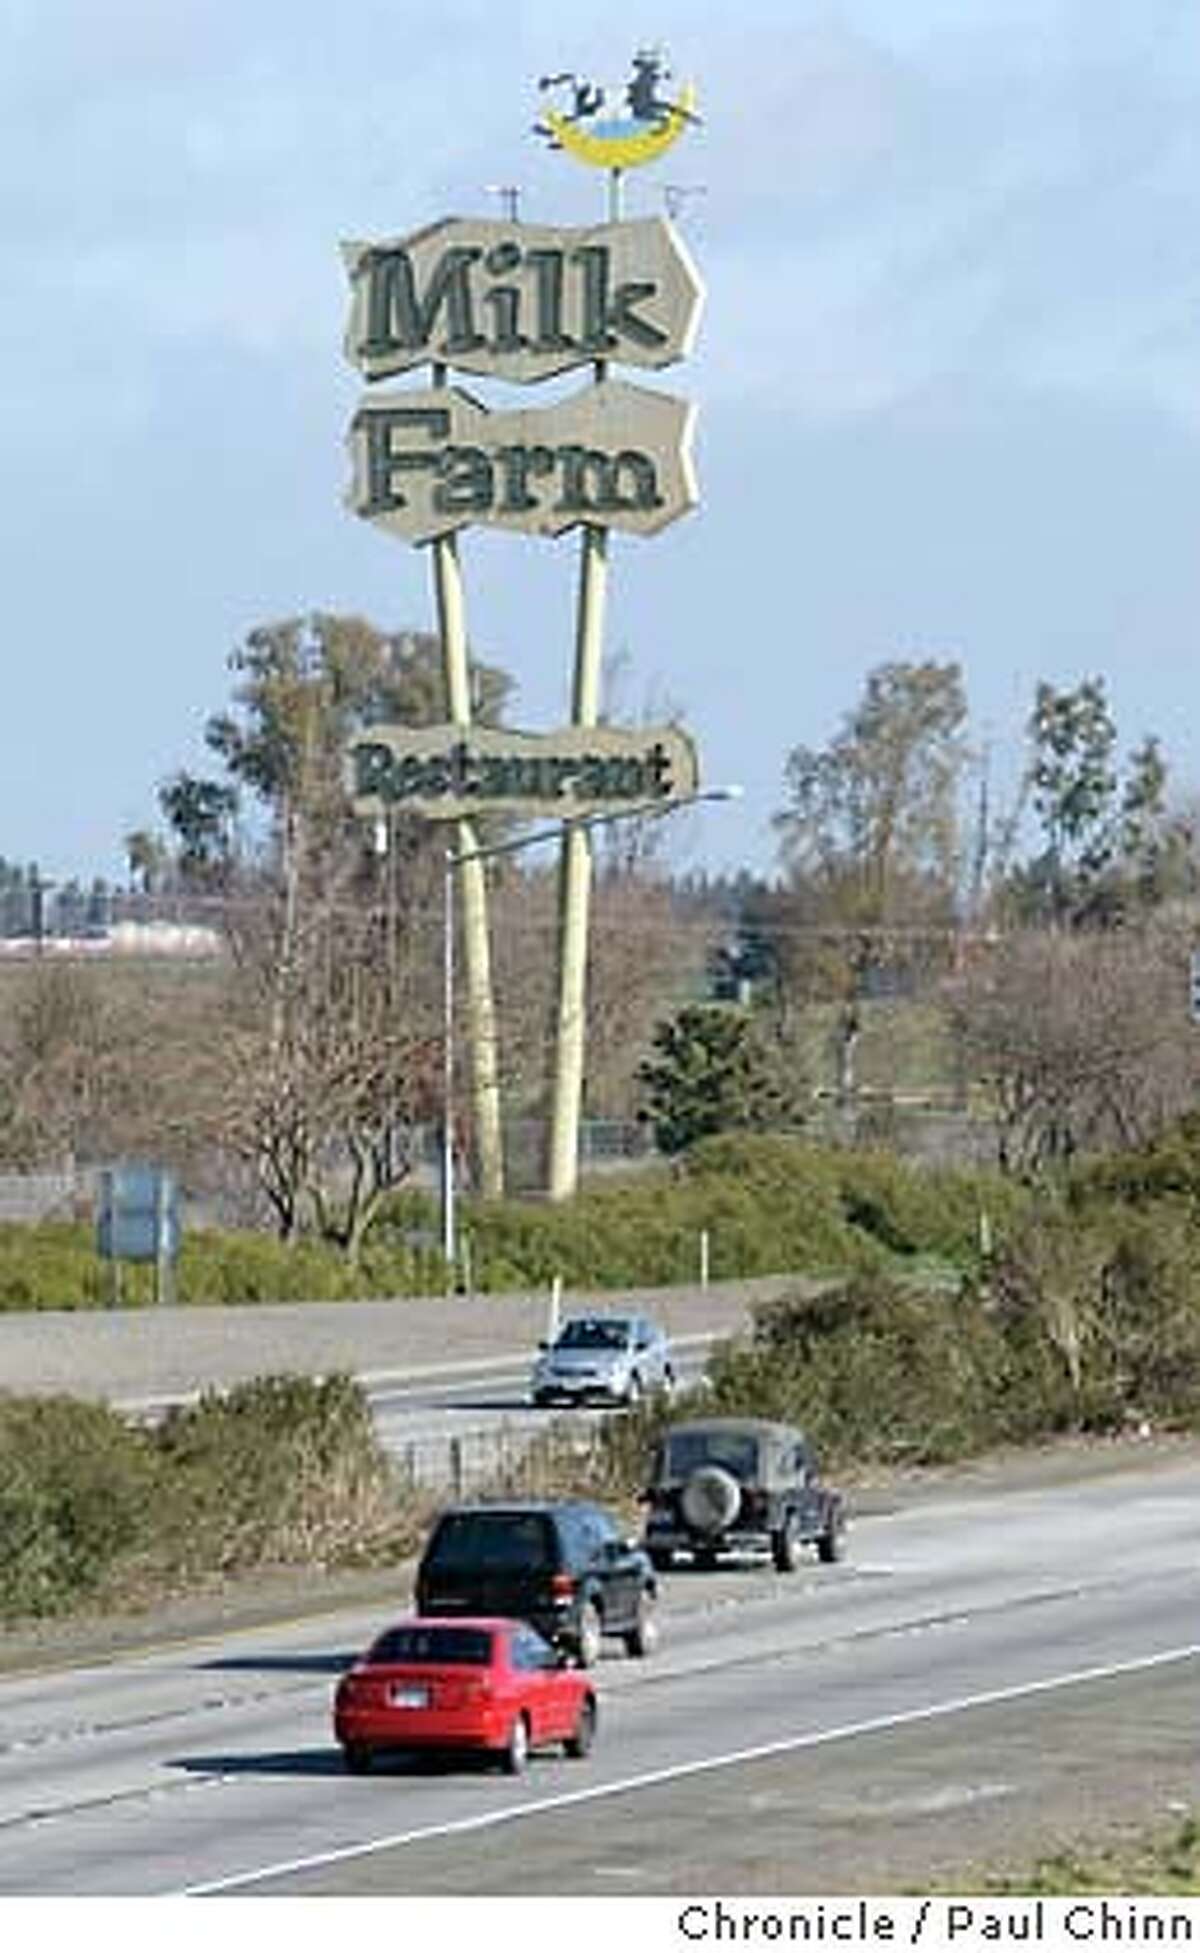 milkfarm05_016_pc.JPG Motorists travelling between the Bay Area and Sacramento can't miss the landmark Milk Farm sign on property owned by Paul Moller. The Milk Farm sign on Interstate 80 on 2/4/04 in Dixon, CA. PAUL CHINN / The Chronicle MANDATORY CREDIT FOR PHOTOG AND SF CHRONICLE/ -MAGS OUT ##Chronicle#3/14/2004#ALL#3star##0421603730